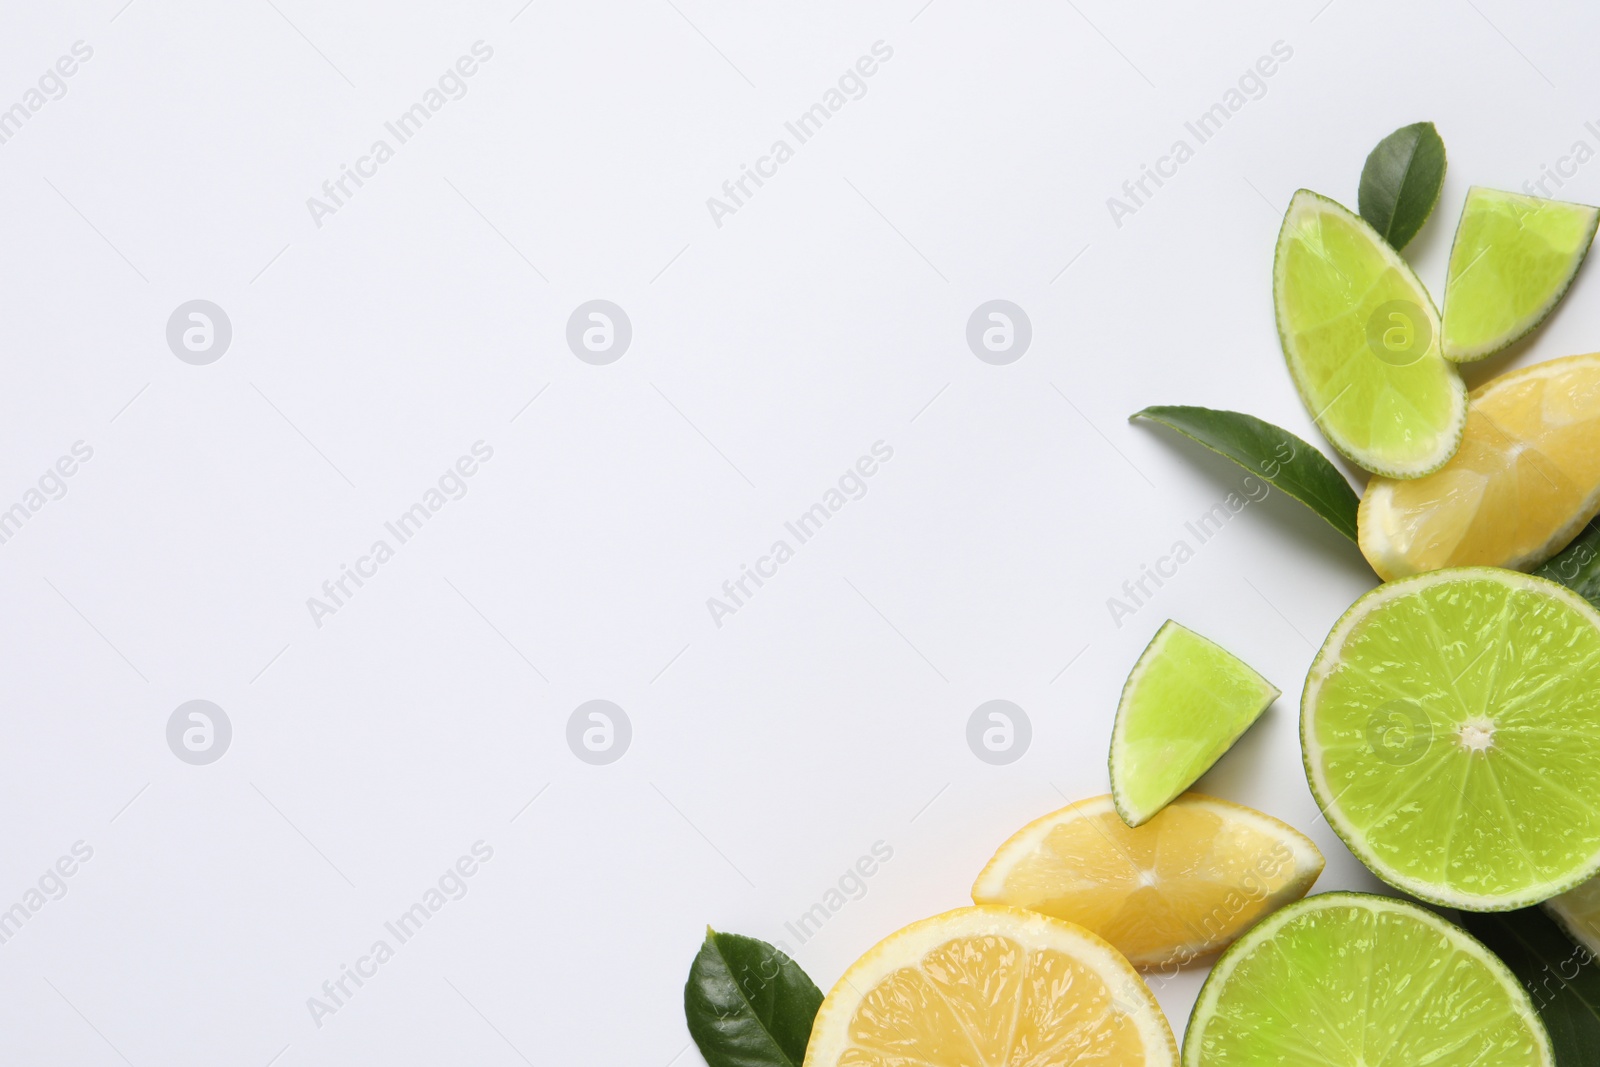 Photo of Fresh ripe lemons, limes and green leaves on white background, top view